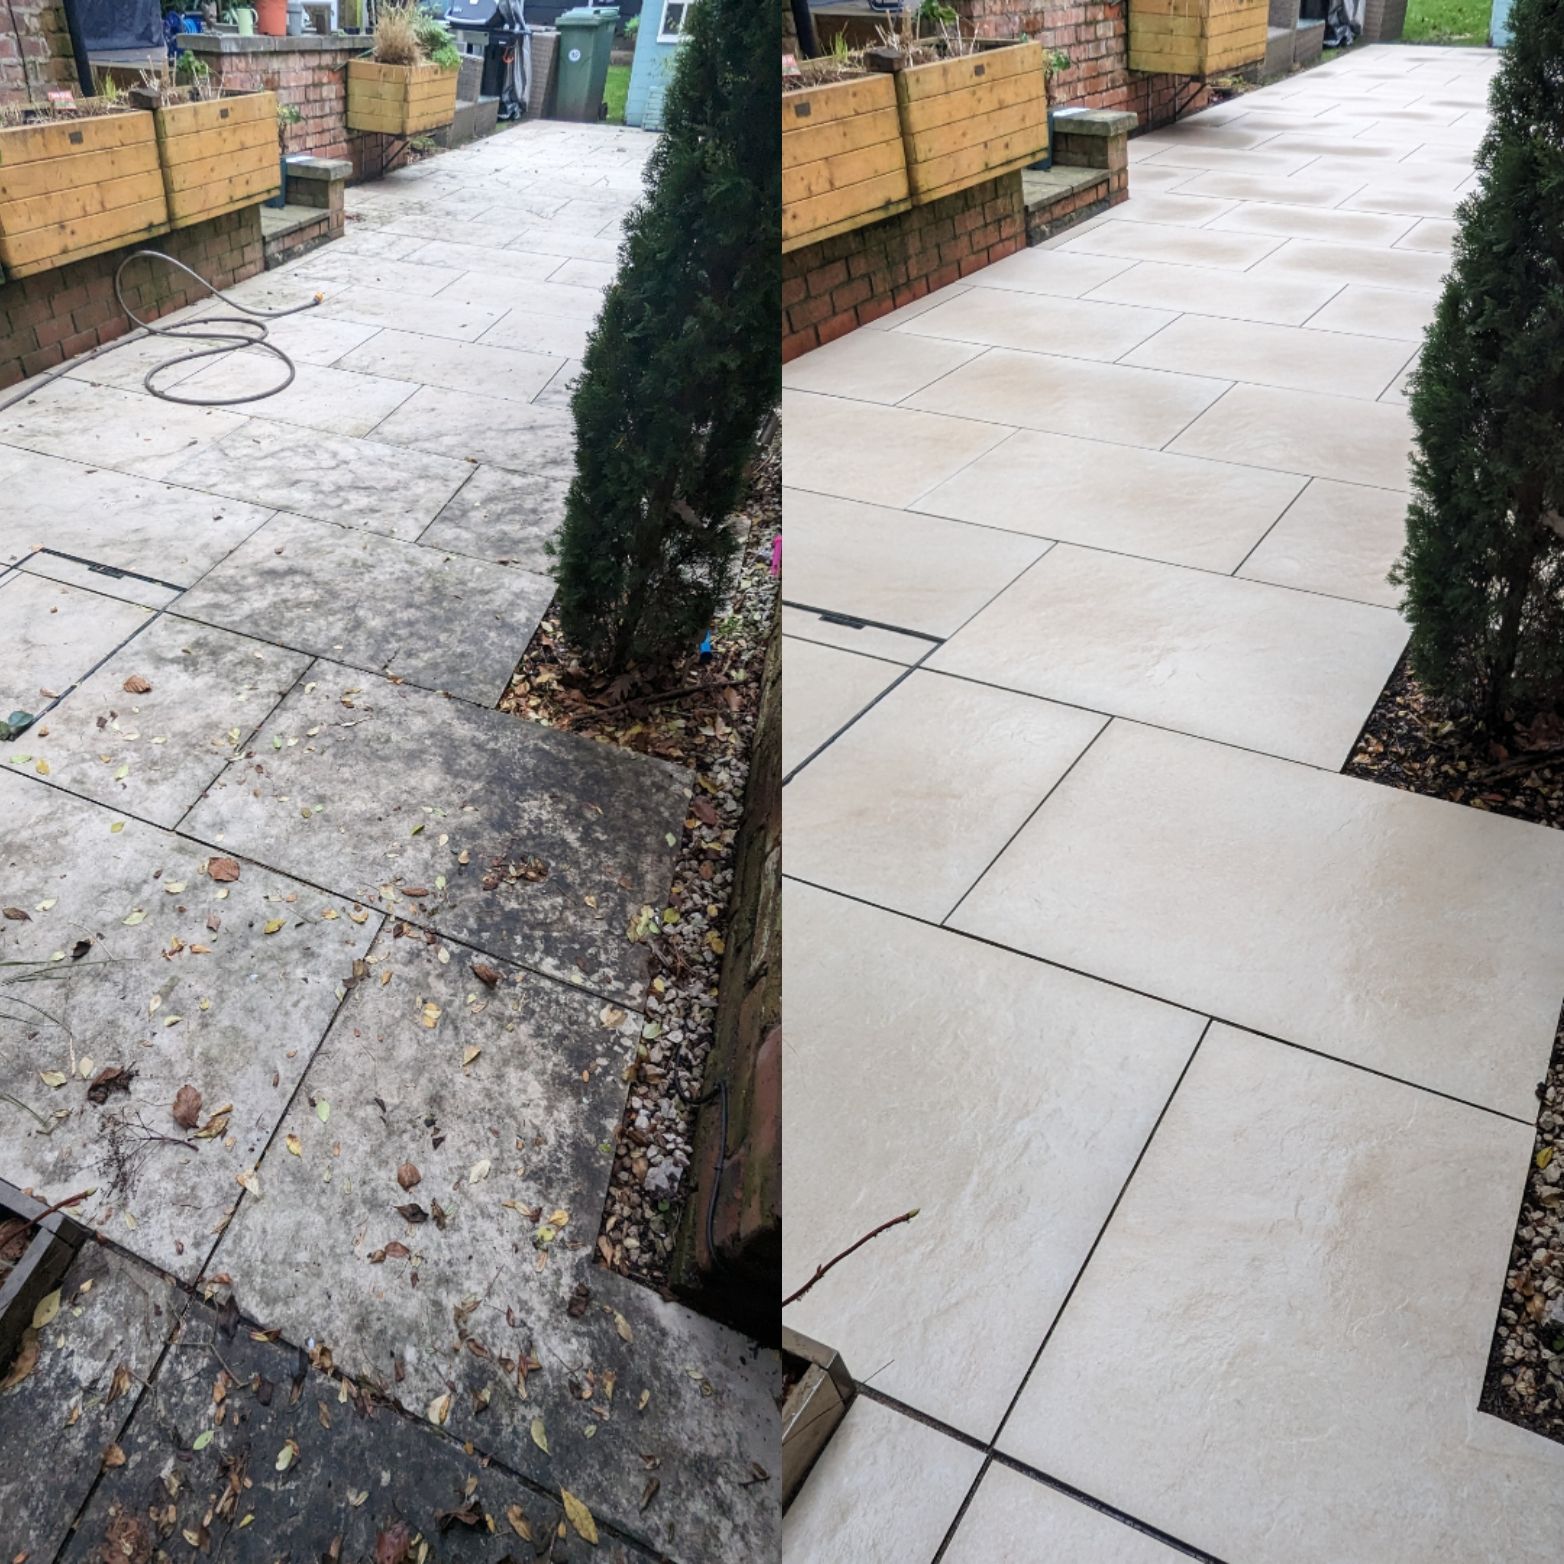 PATIO PORCELAIN TILES AND GROUT DEEP CLEANING AND SEALING IN STOCKPORT, GREATER MANCHESTER